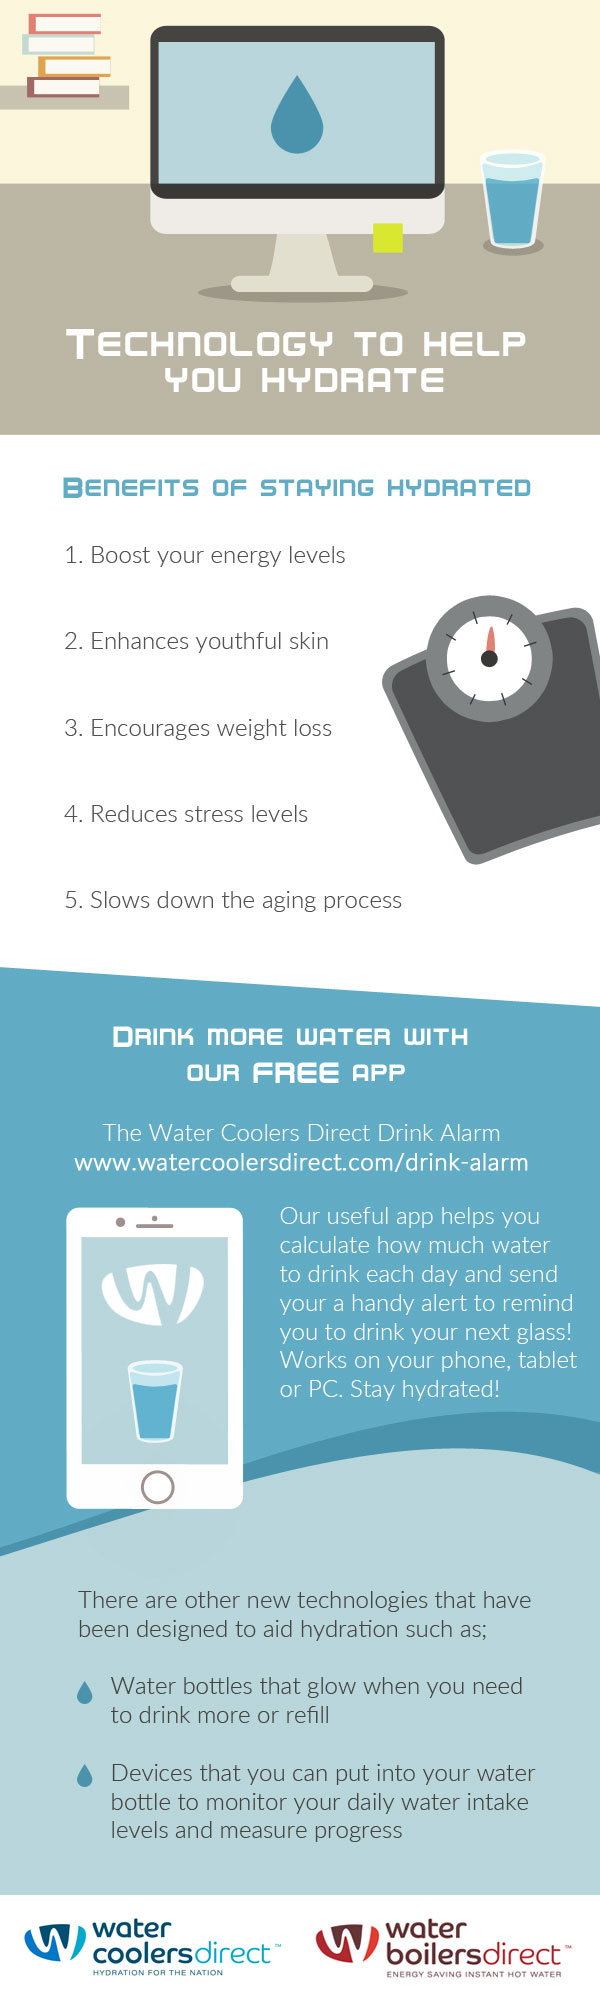 Technology To Help You Hydrate